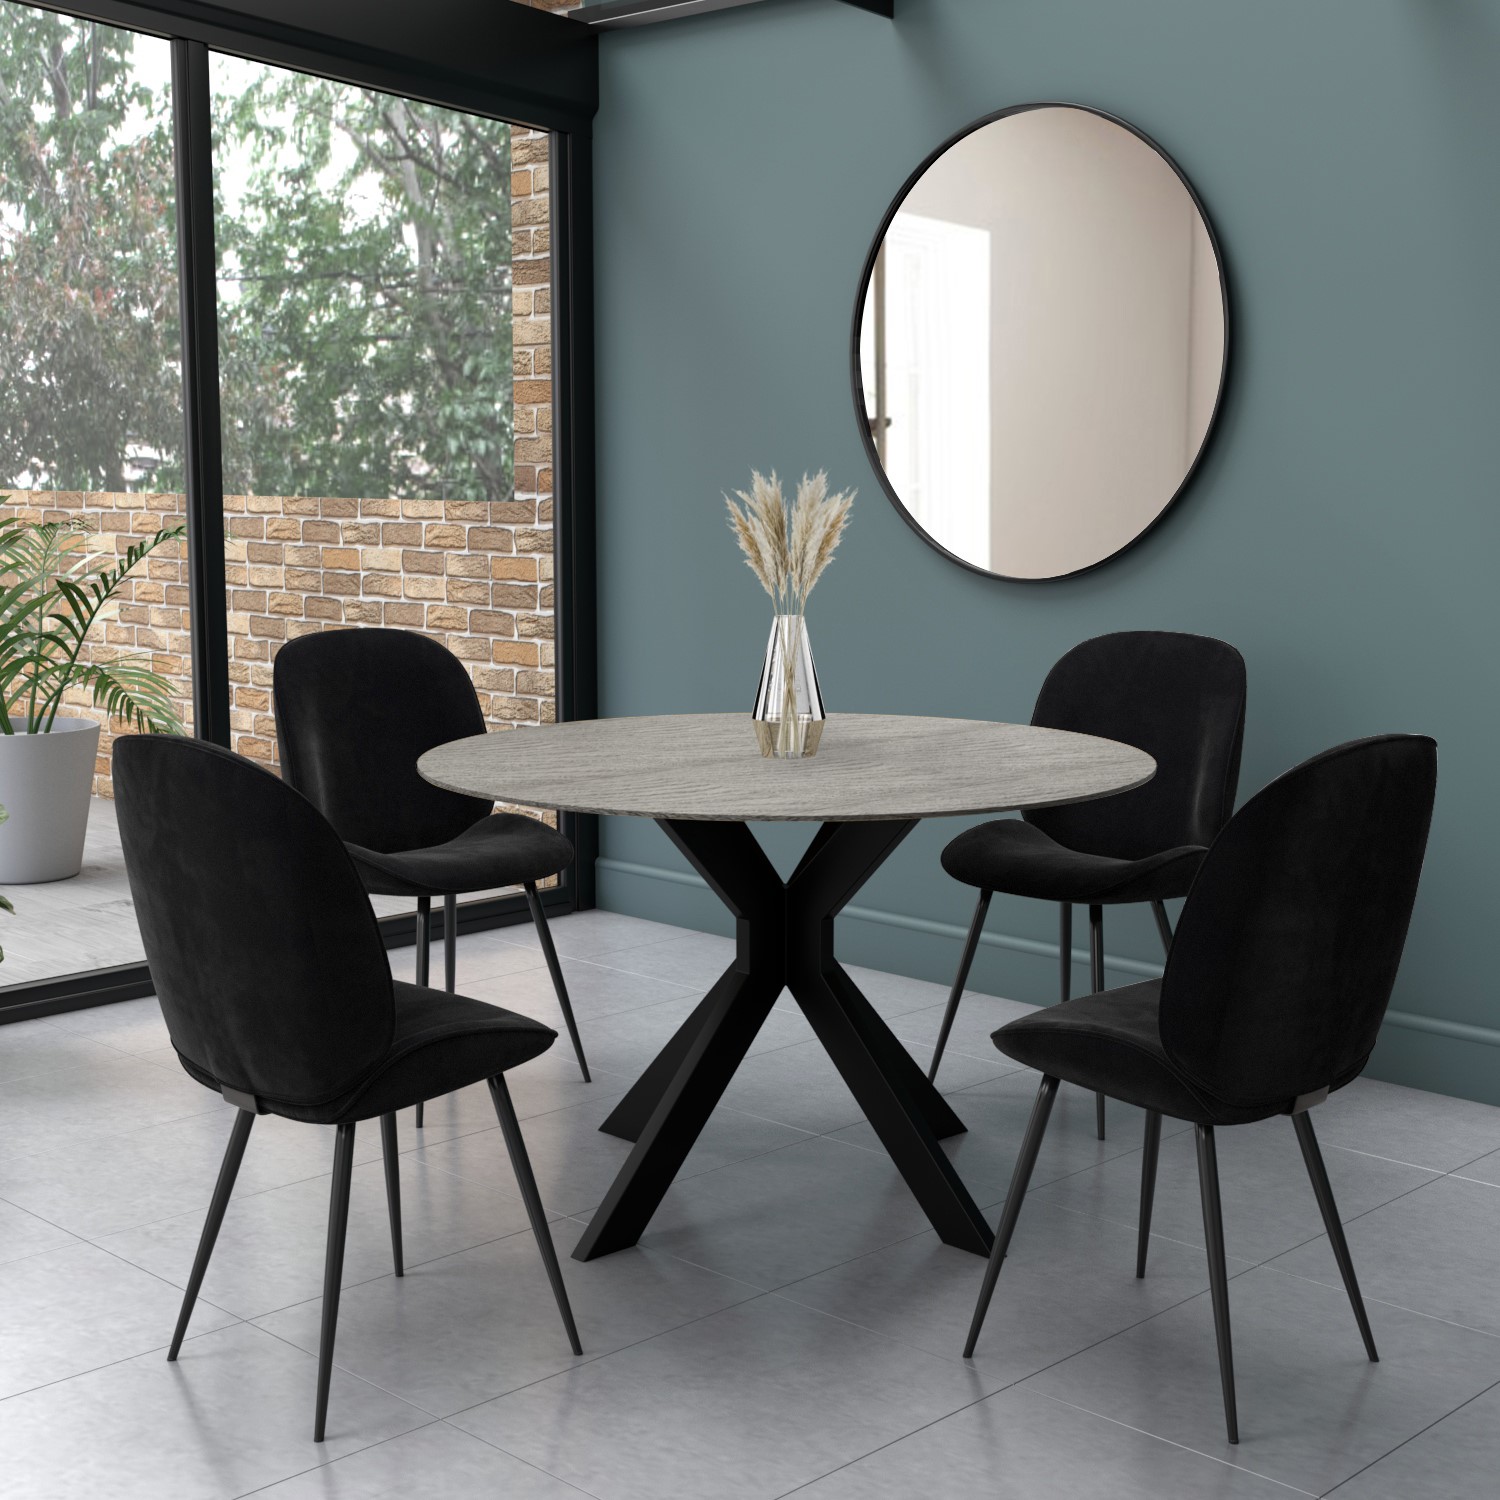 Round Grey Drop Leaf Dining Table With, Black Round Dining Room Table With Leaf